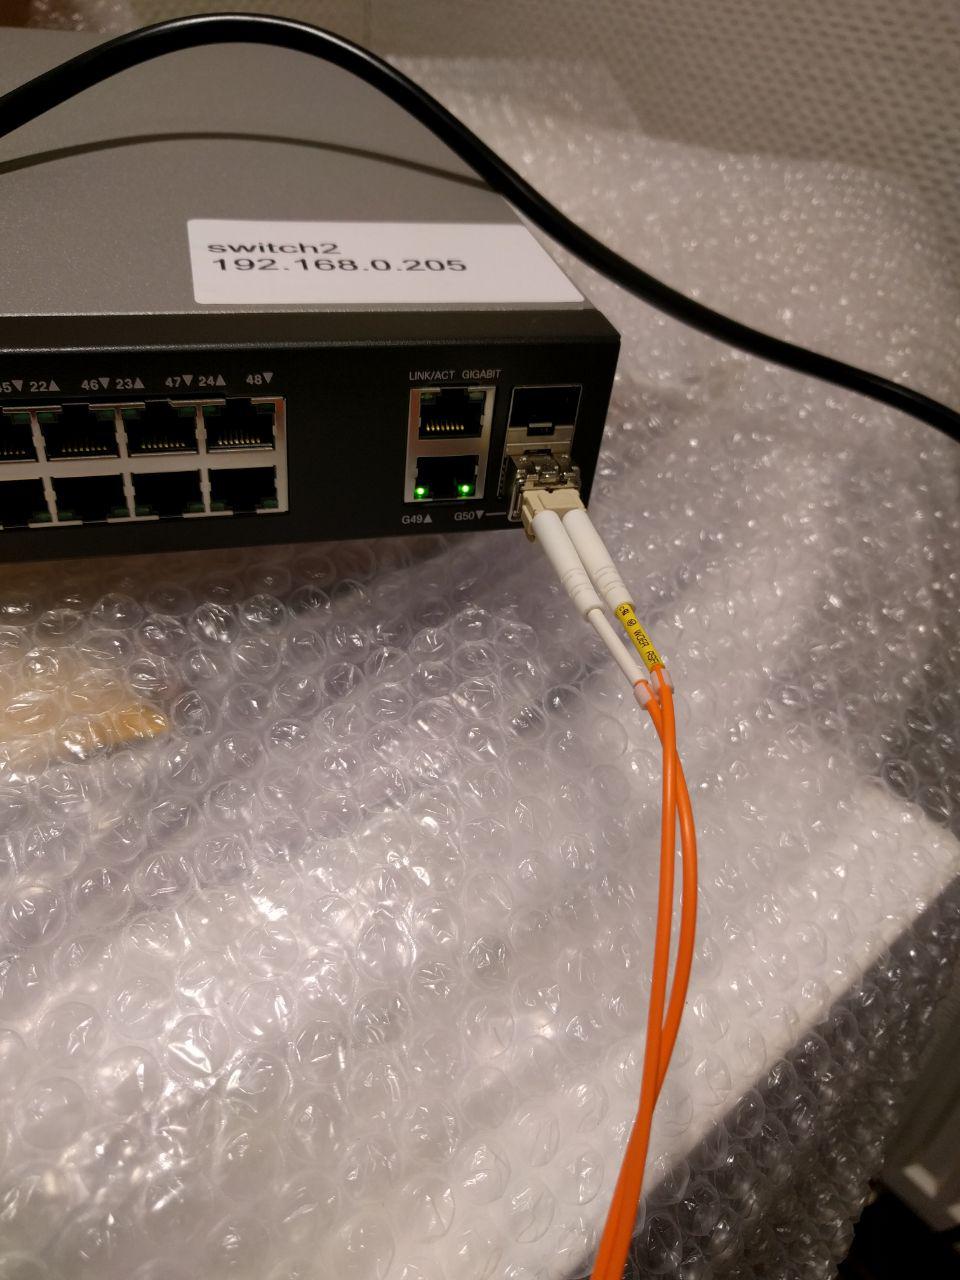 interconnecting two 48x ports 1Gbit switches cisco 200-50GS switch with fibre gbic Transceiver Modul mit DOM - Cisco GLC-SX-MM Kompatibles 1000BASE-SX SFP 850nm 550m - https://www.fs.com/de/products/11774.html